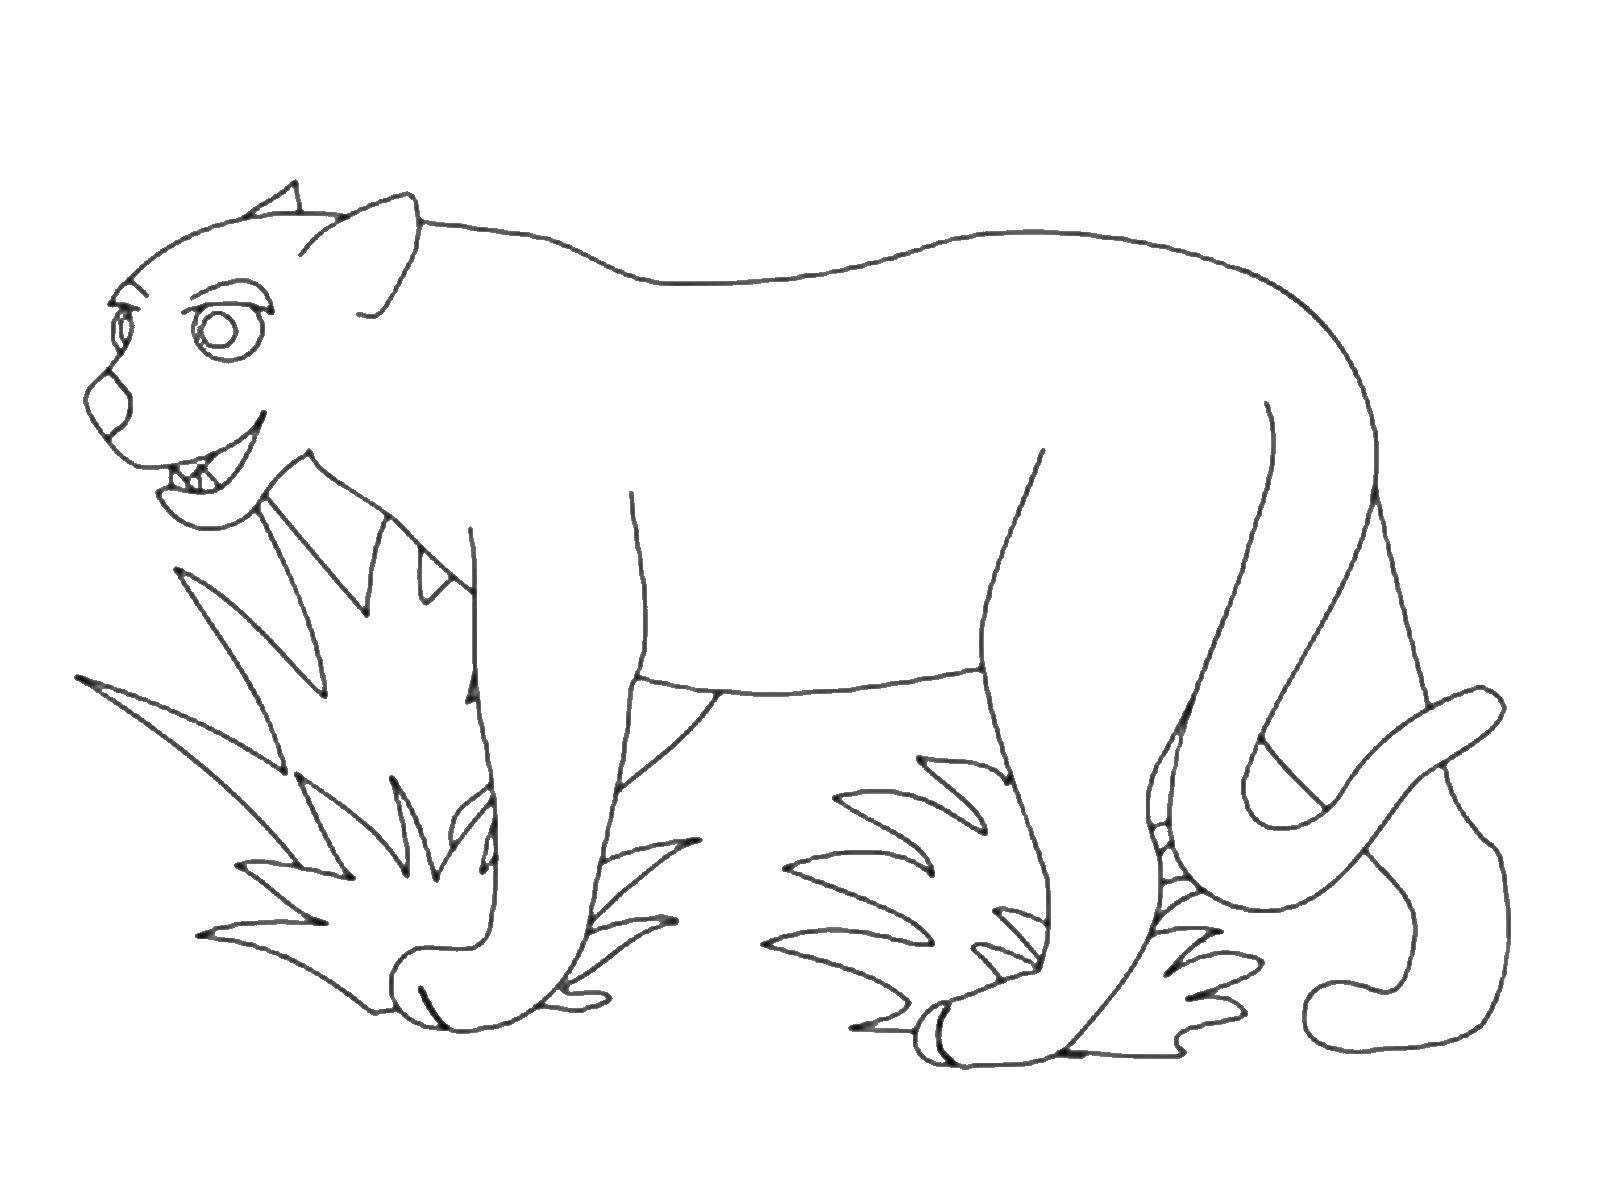 Coloring Panther. Category Animals. Tags:  Animals, Panther.